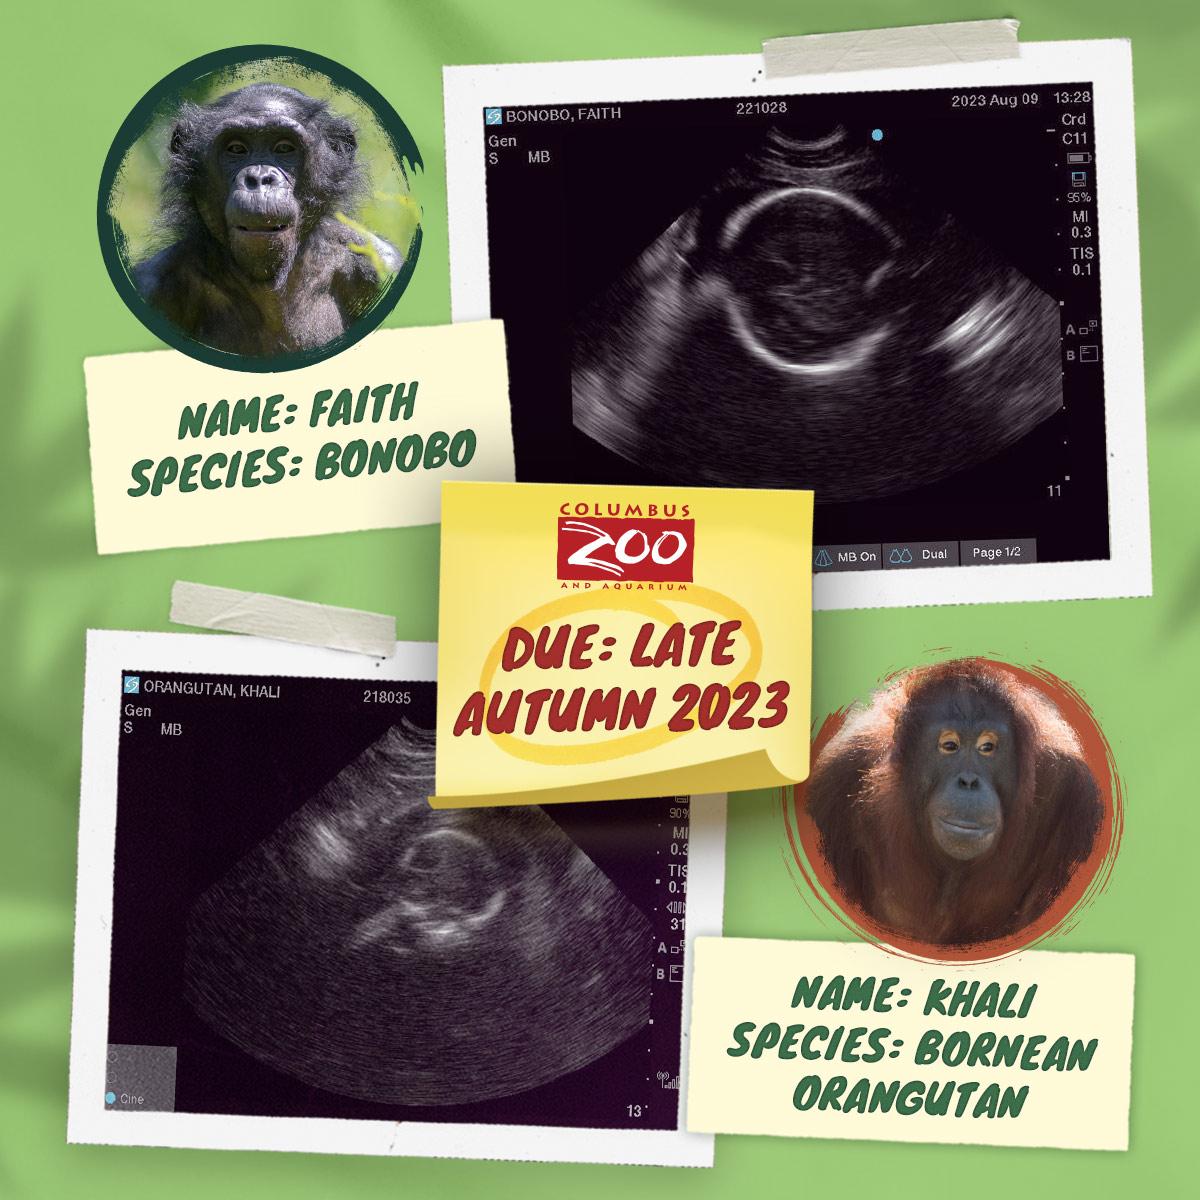 Two Endangered Great Apes Expecting Babies This Fall at the Columbus Zoo  and Aquarium | Columbus Zoo and Aquarium